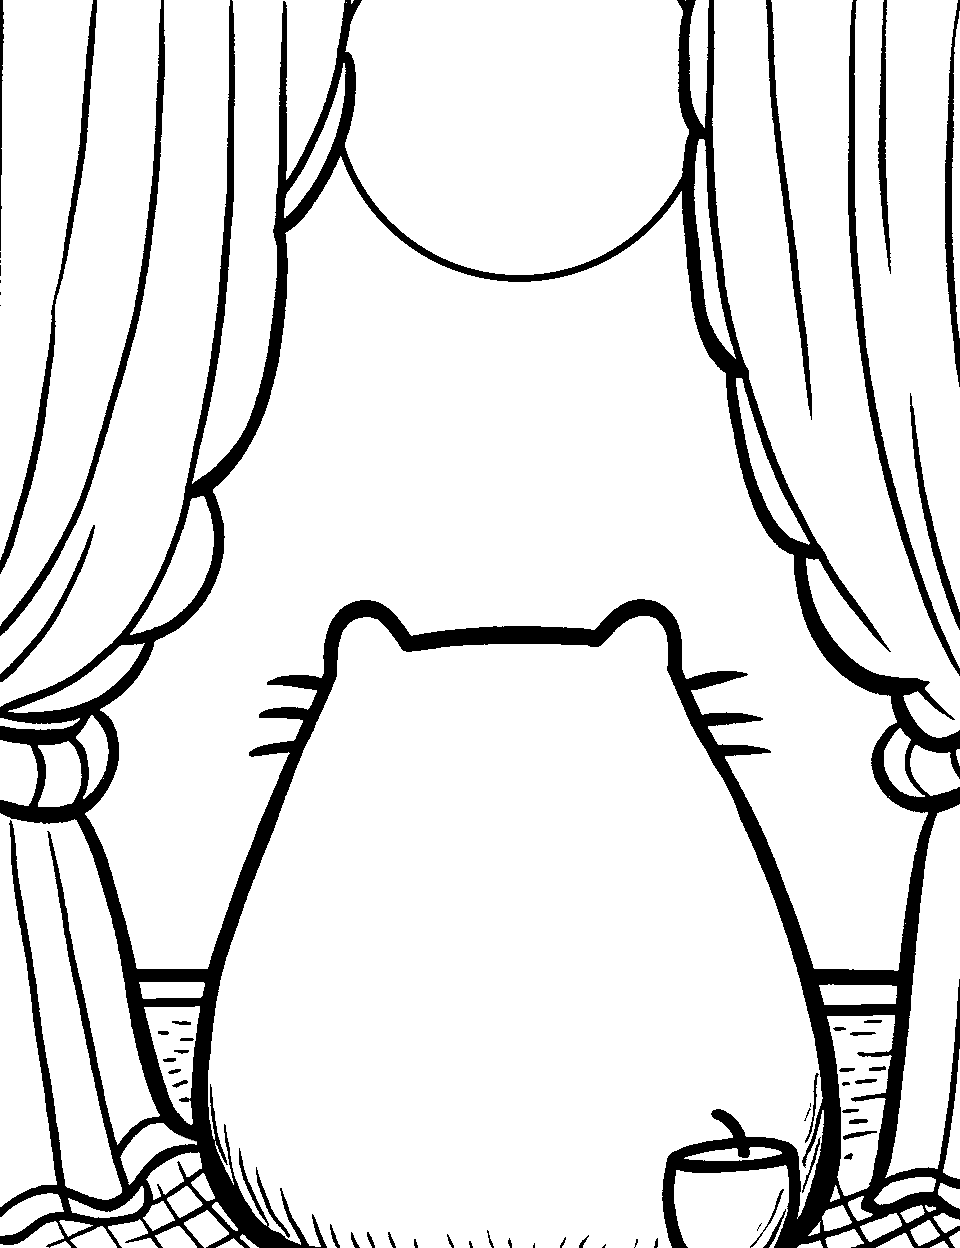 Lazy Day Coloring Page - Pusheen sitting by a window, watching outside.